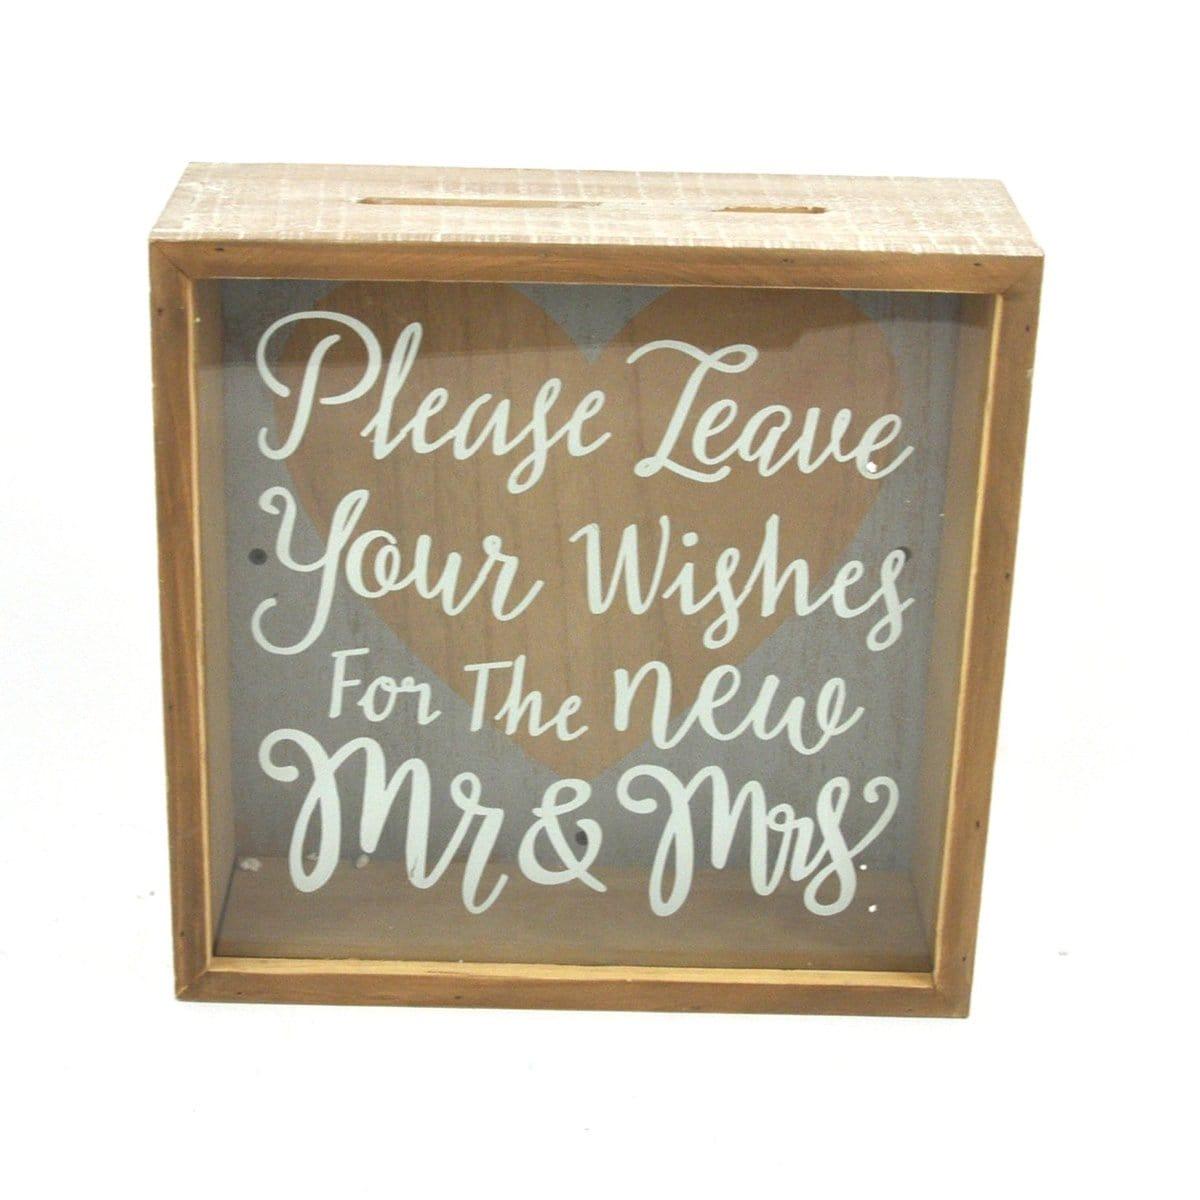 Buy Wedding Wedding Card Box Mr & Mrs sold at Party Expert